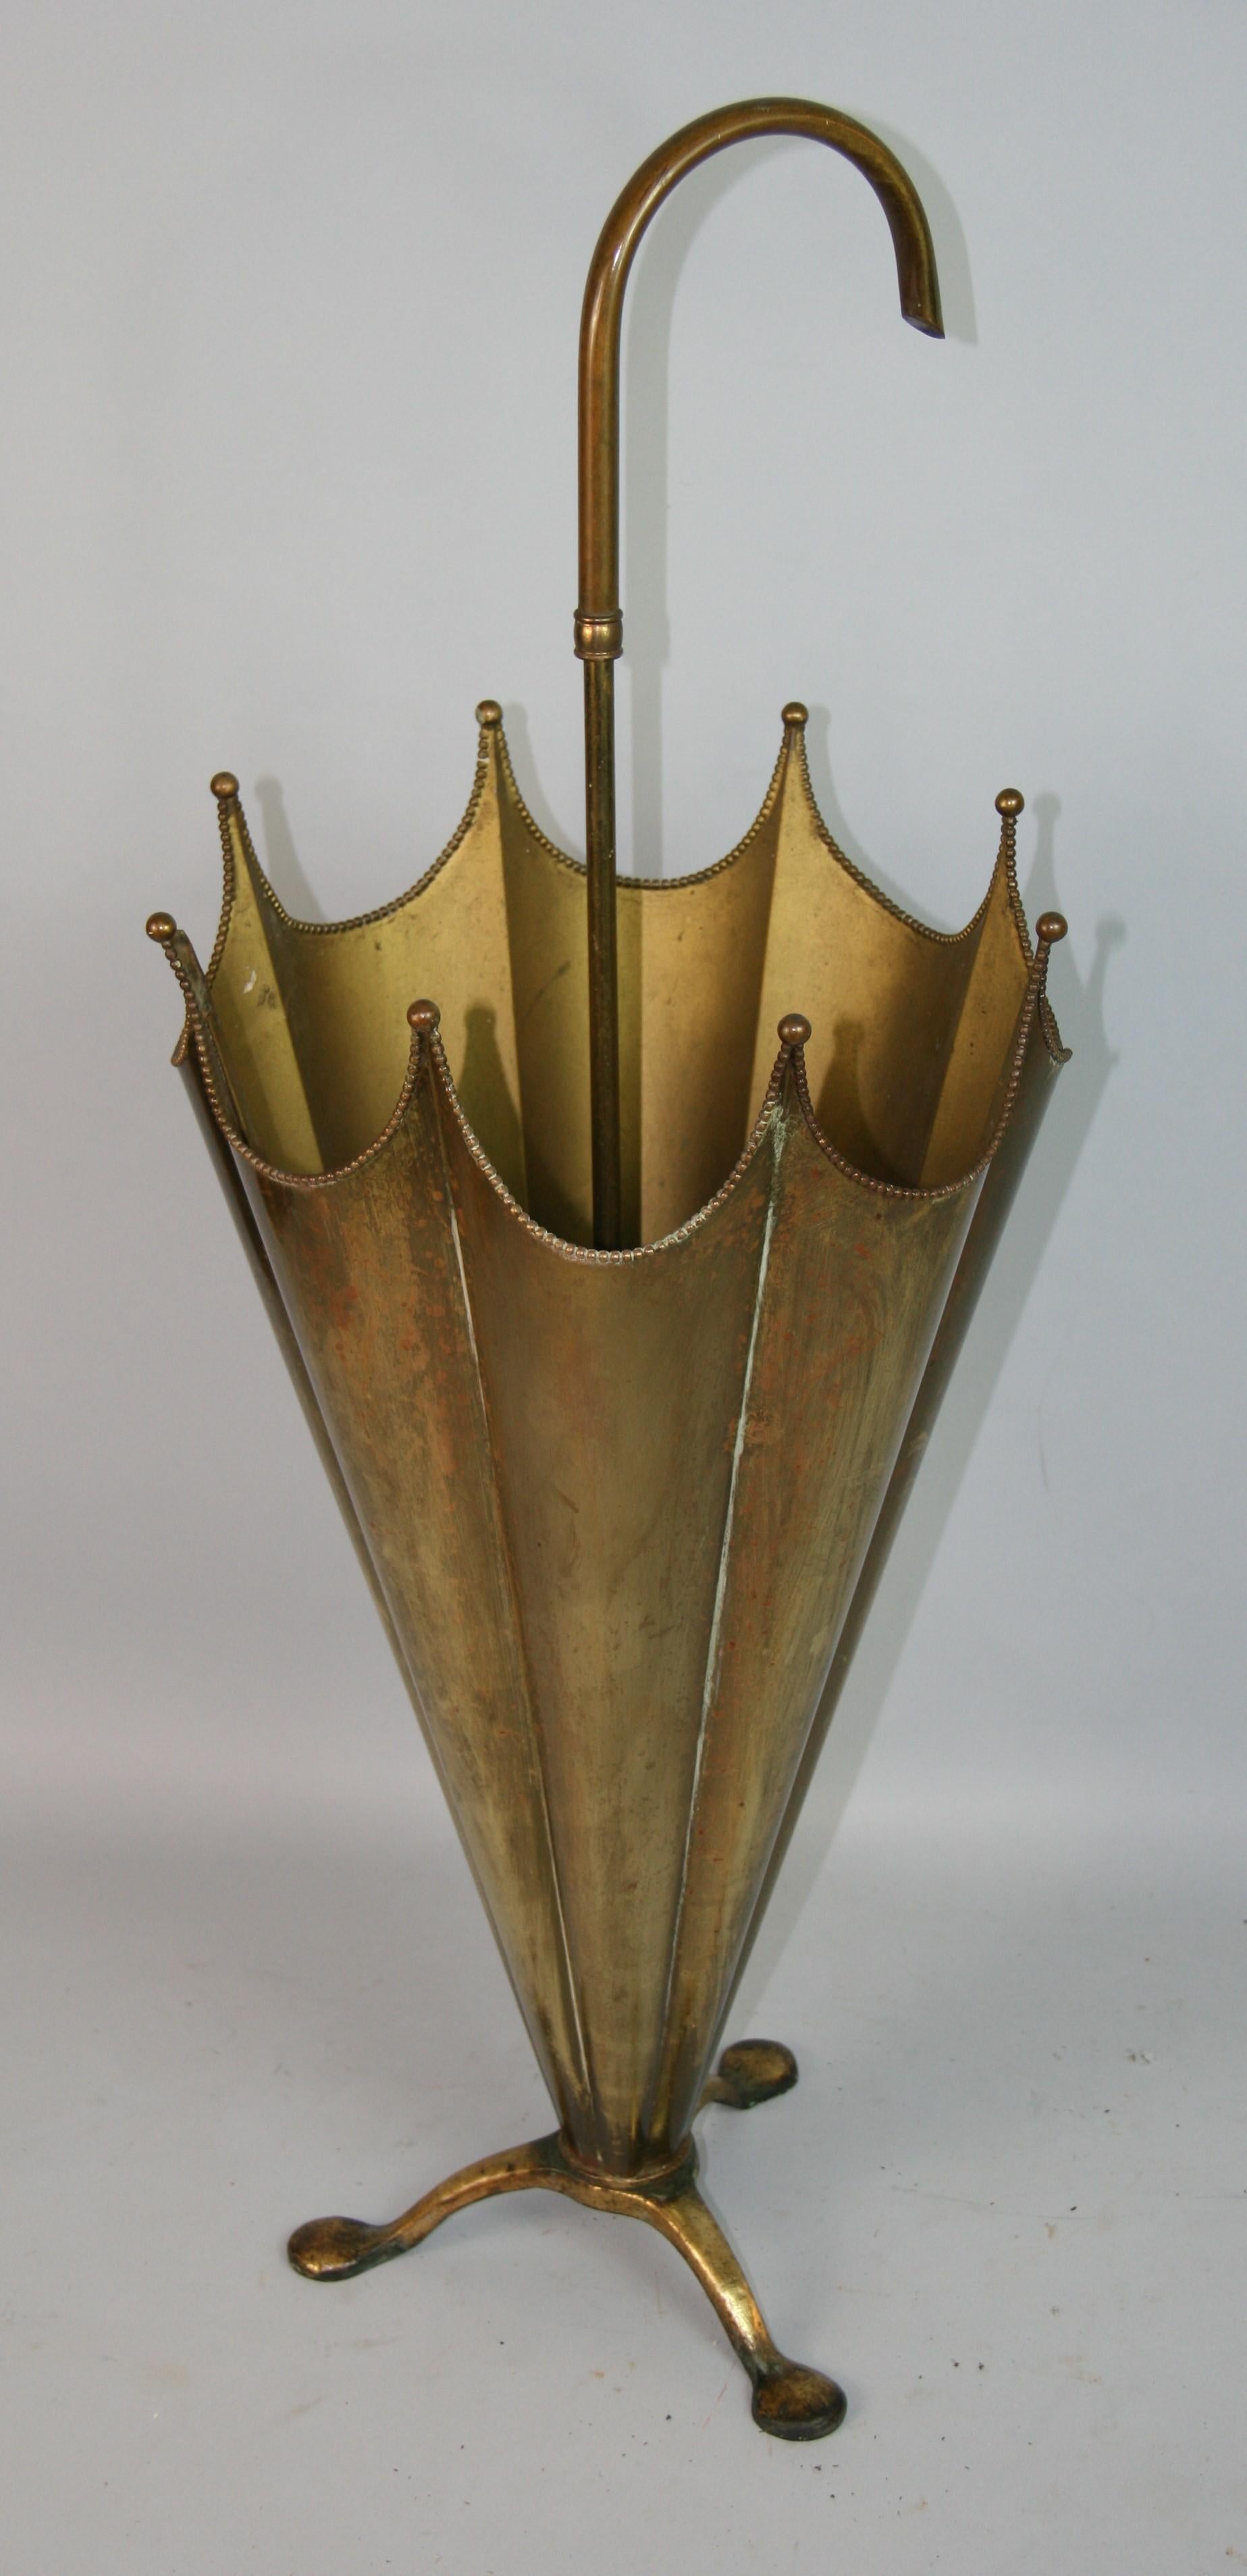 1489 Brass umbrella shaped umbrella stand.
Rich patina is a testament to its years of age and use